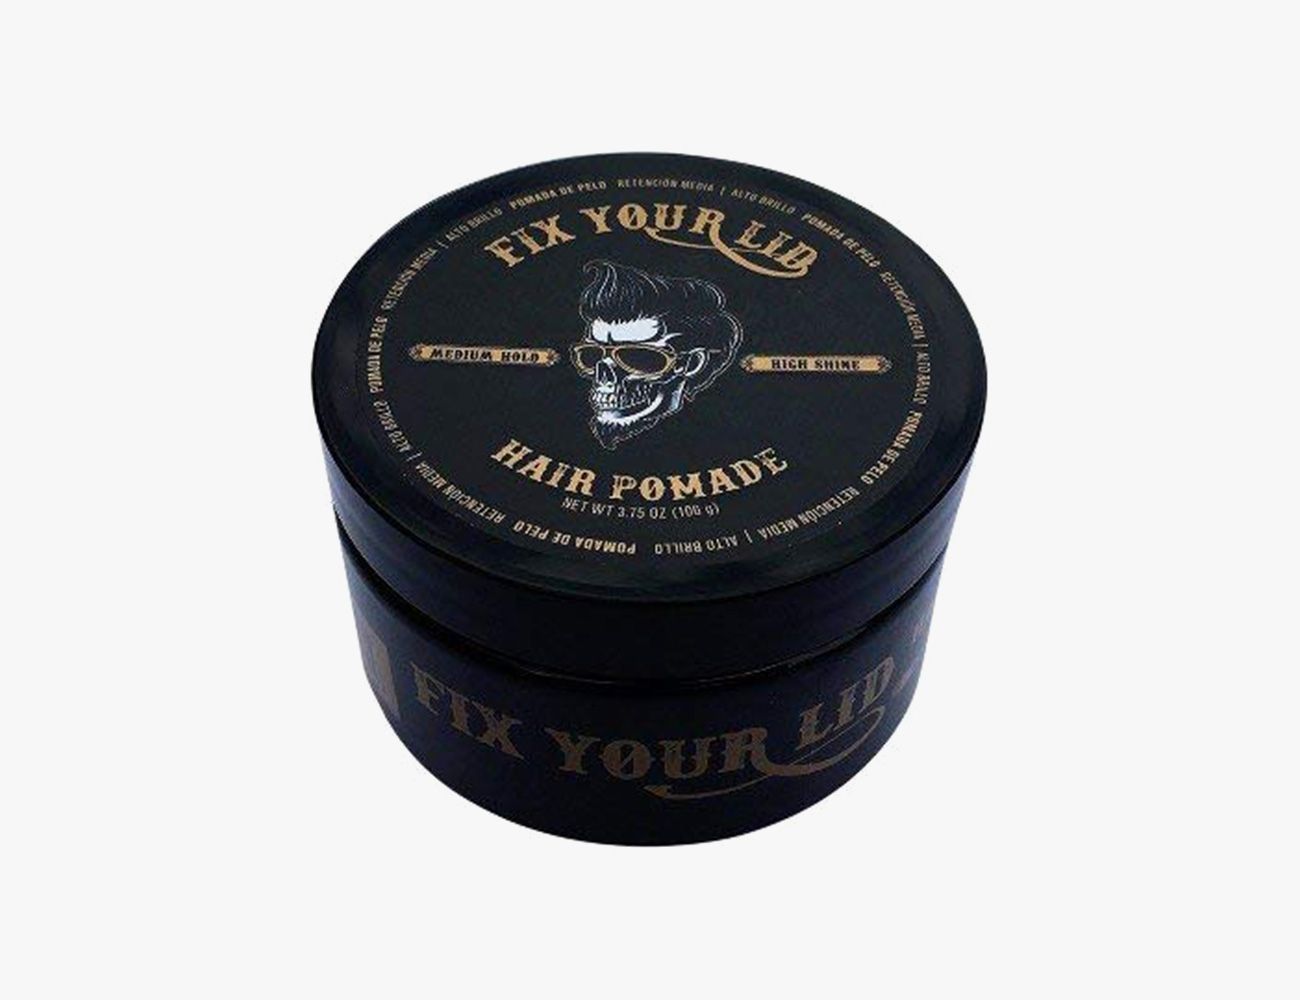 Grooming Gear by FIX YOUR LID 